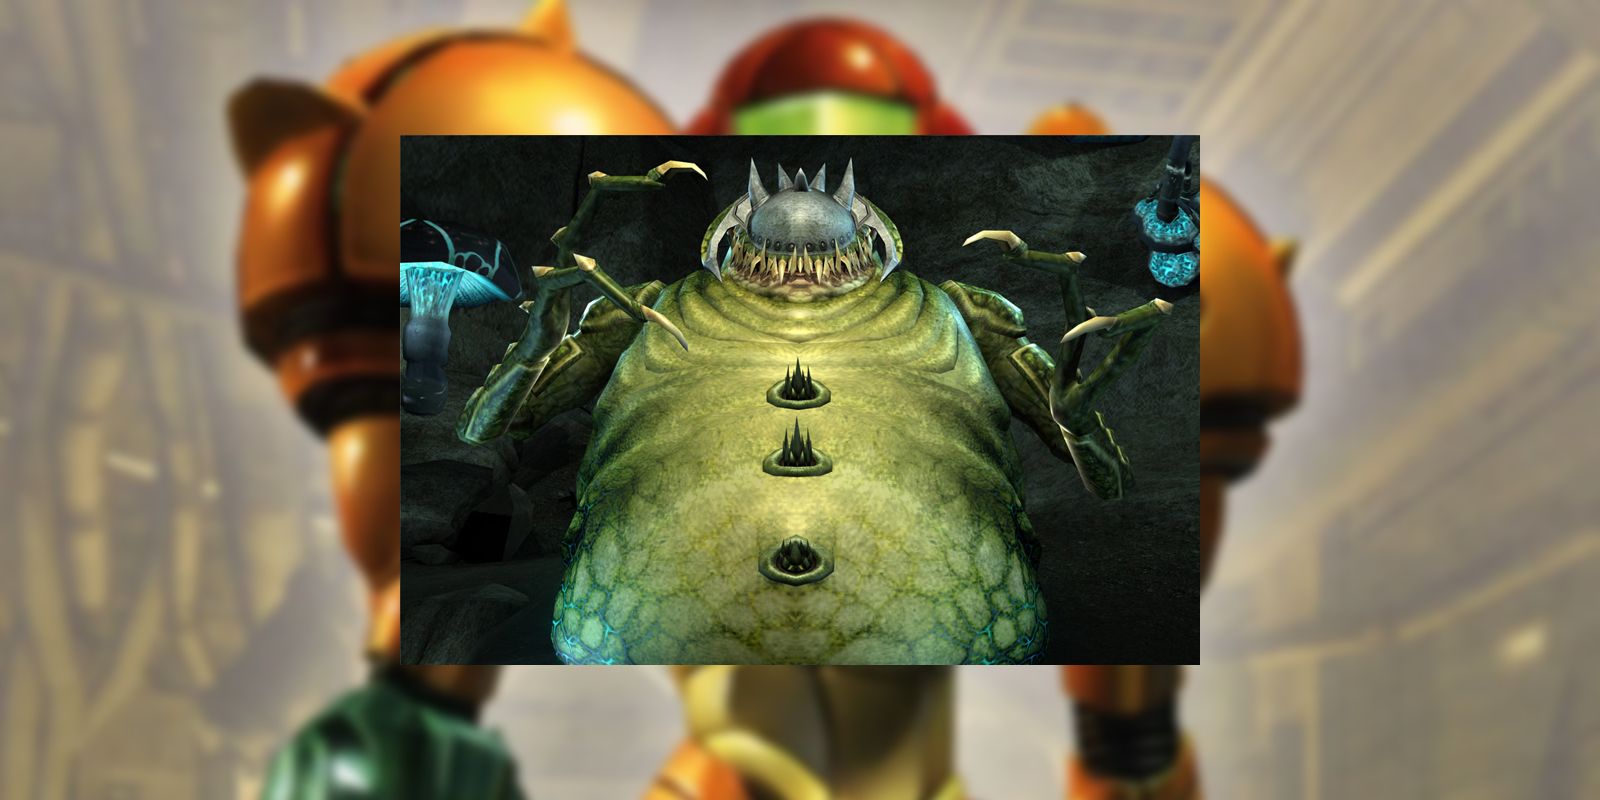 Kraid would have returned in Metroid Prime but he was cut